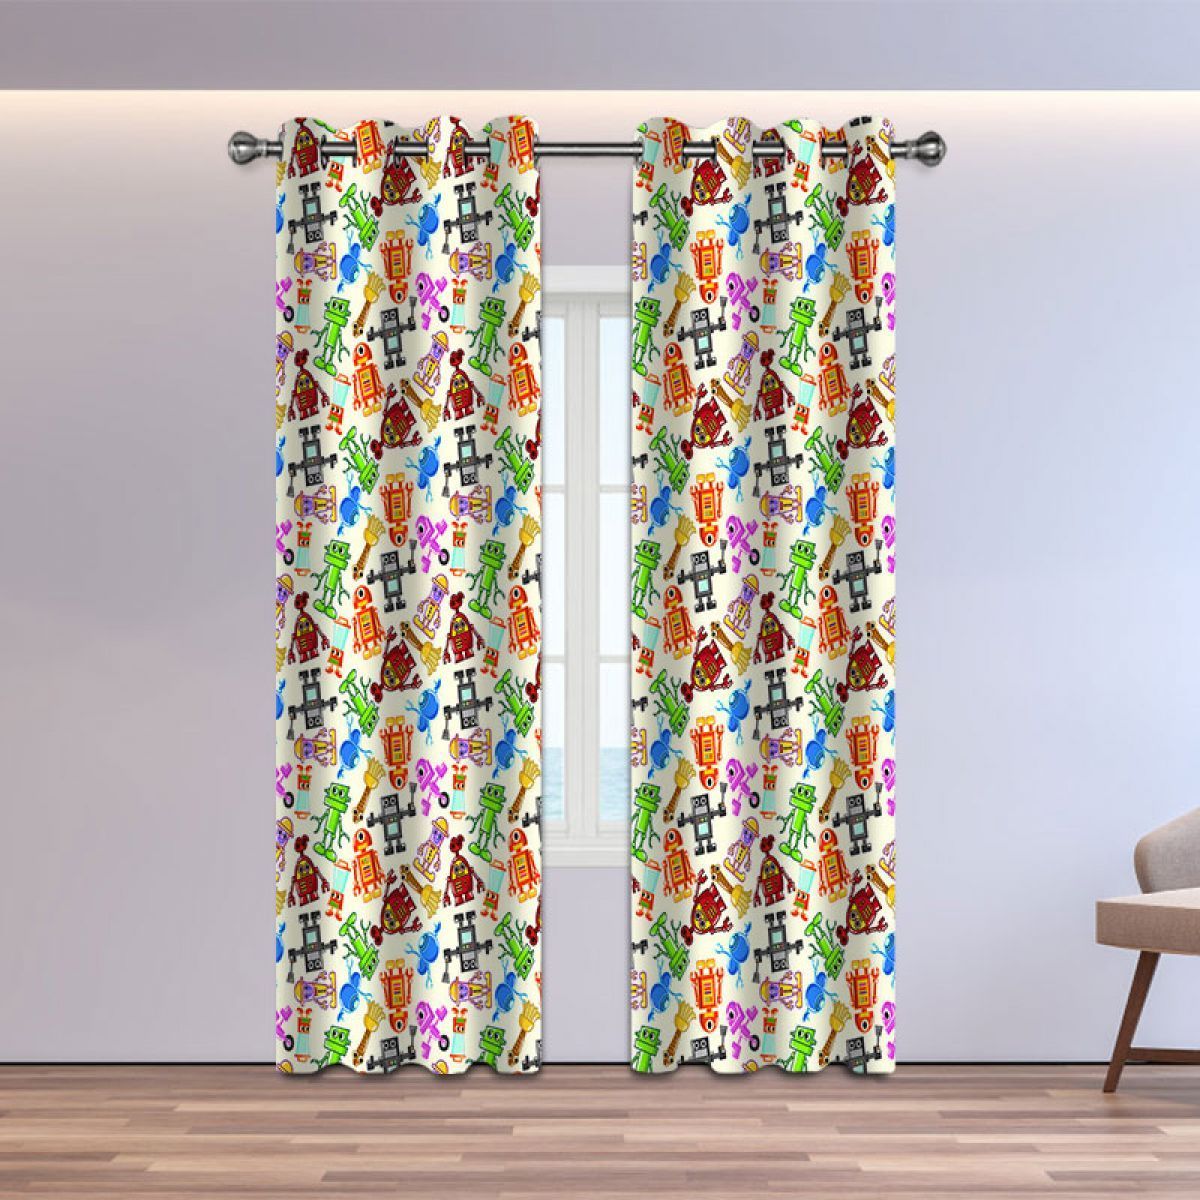 3d Colorful Robot White Background Printed Window Curtain Home Decor